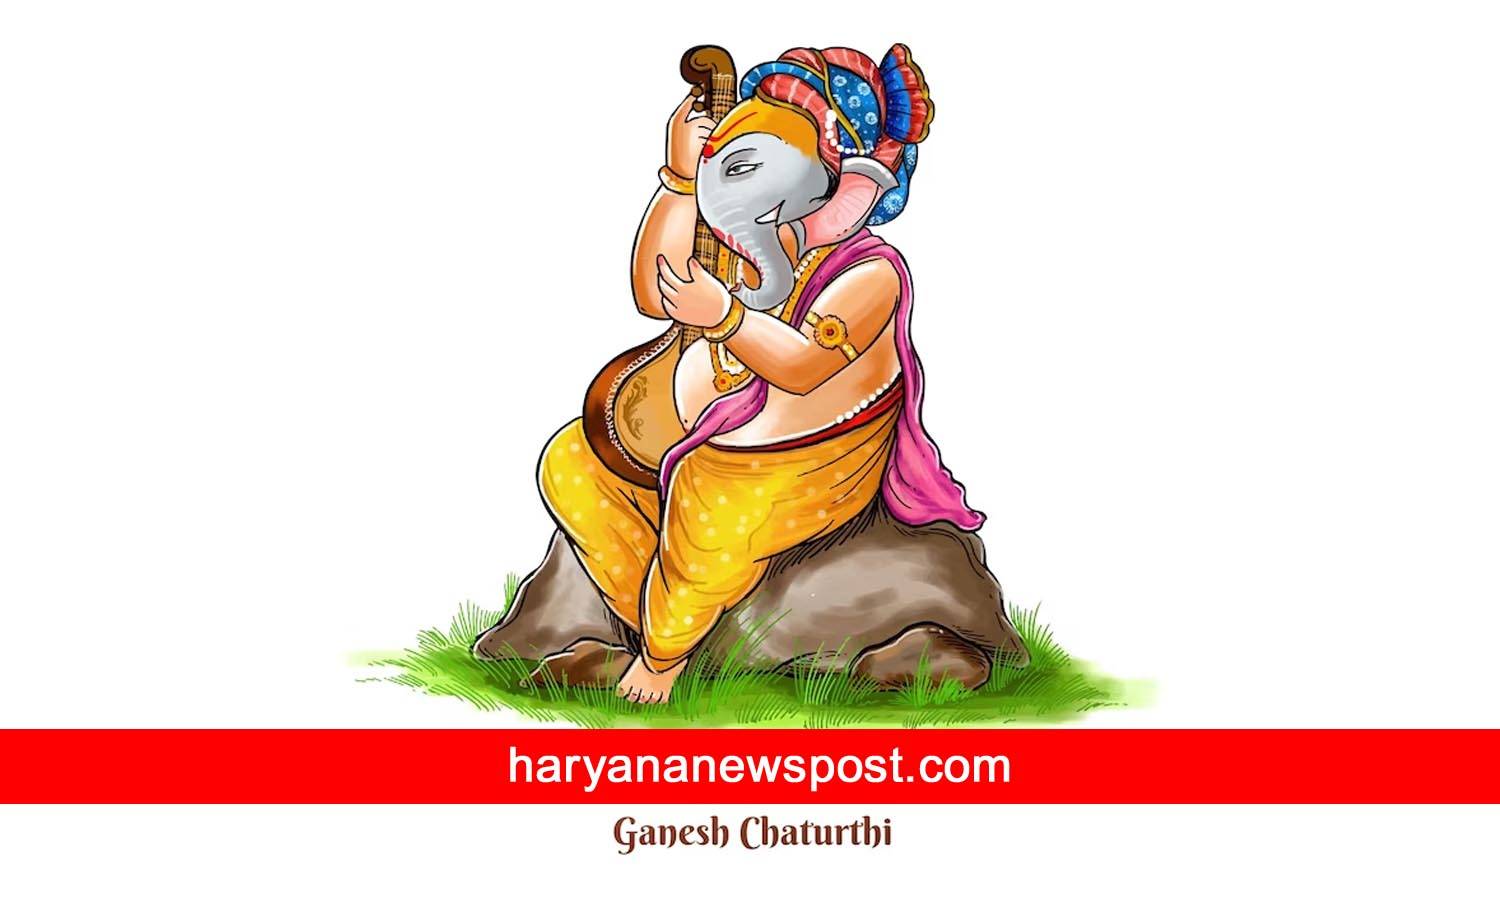 Ganesh Chaturthi 2018 Wishes, Best Ganpati Messages for Wife